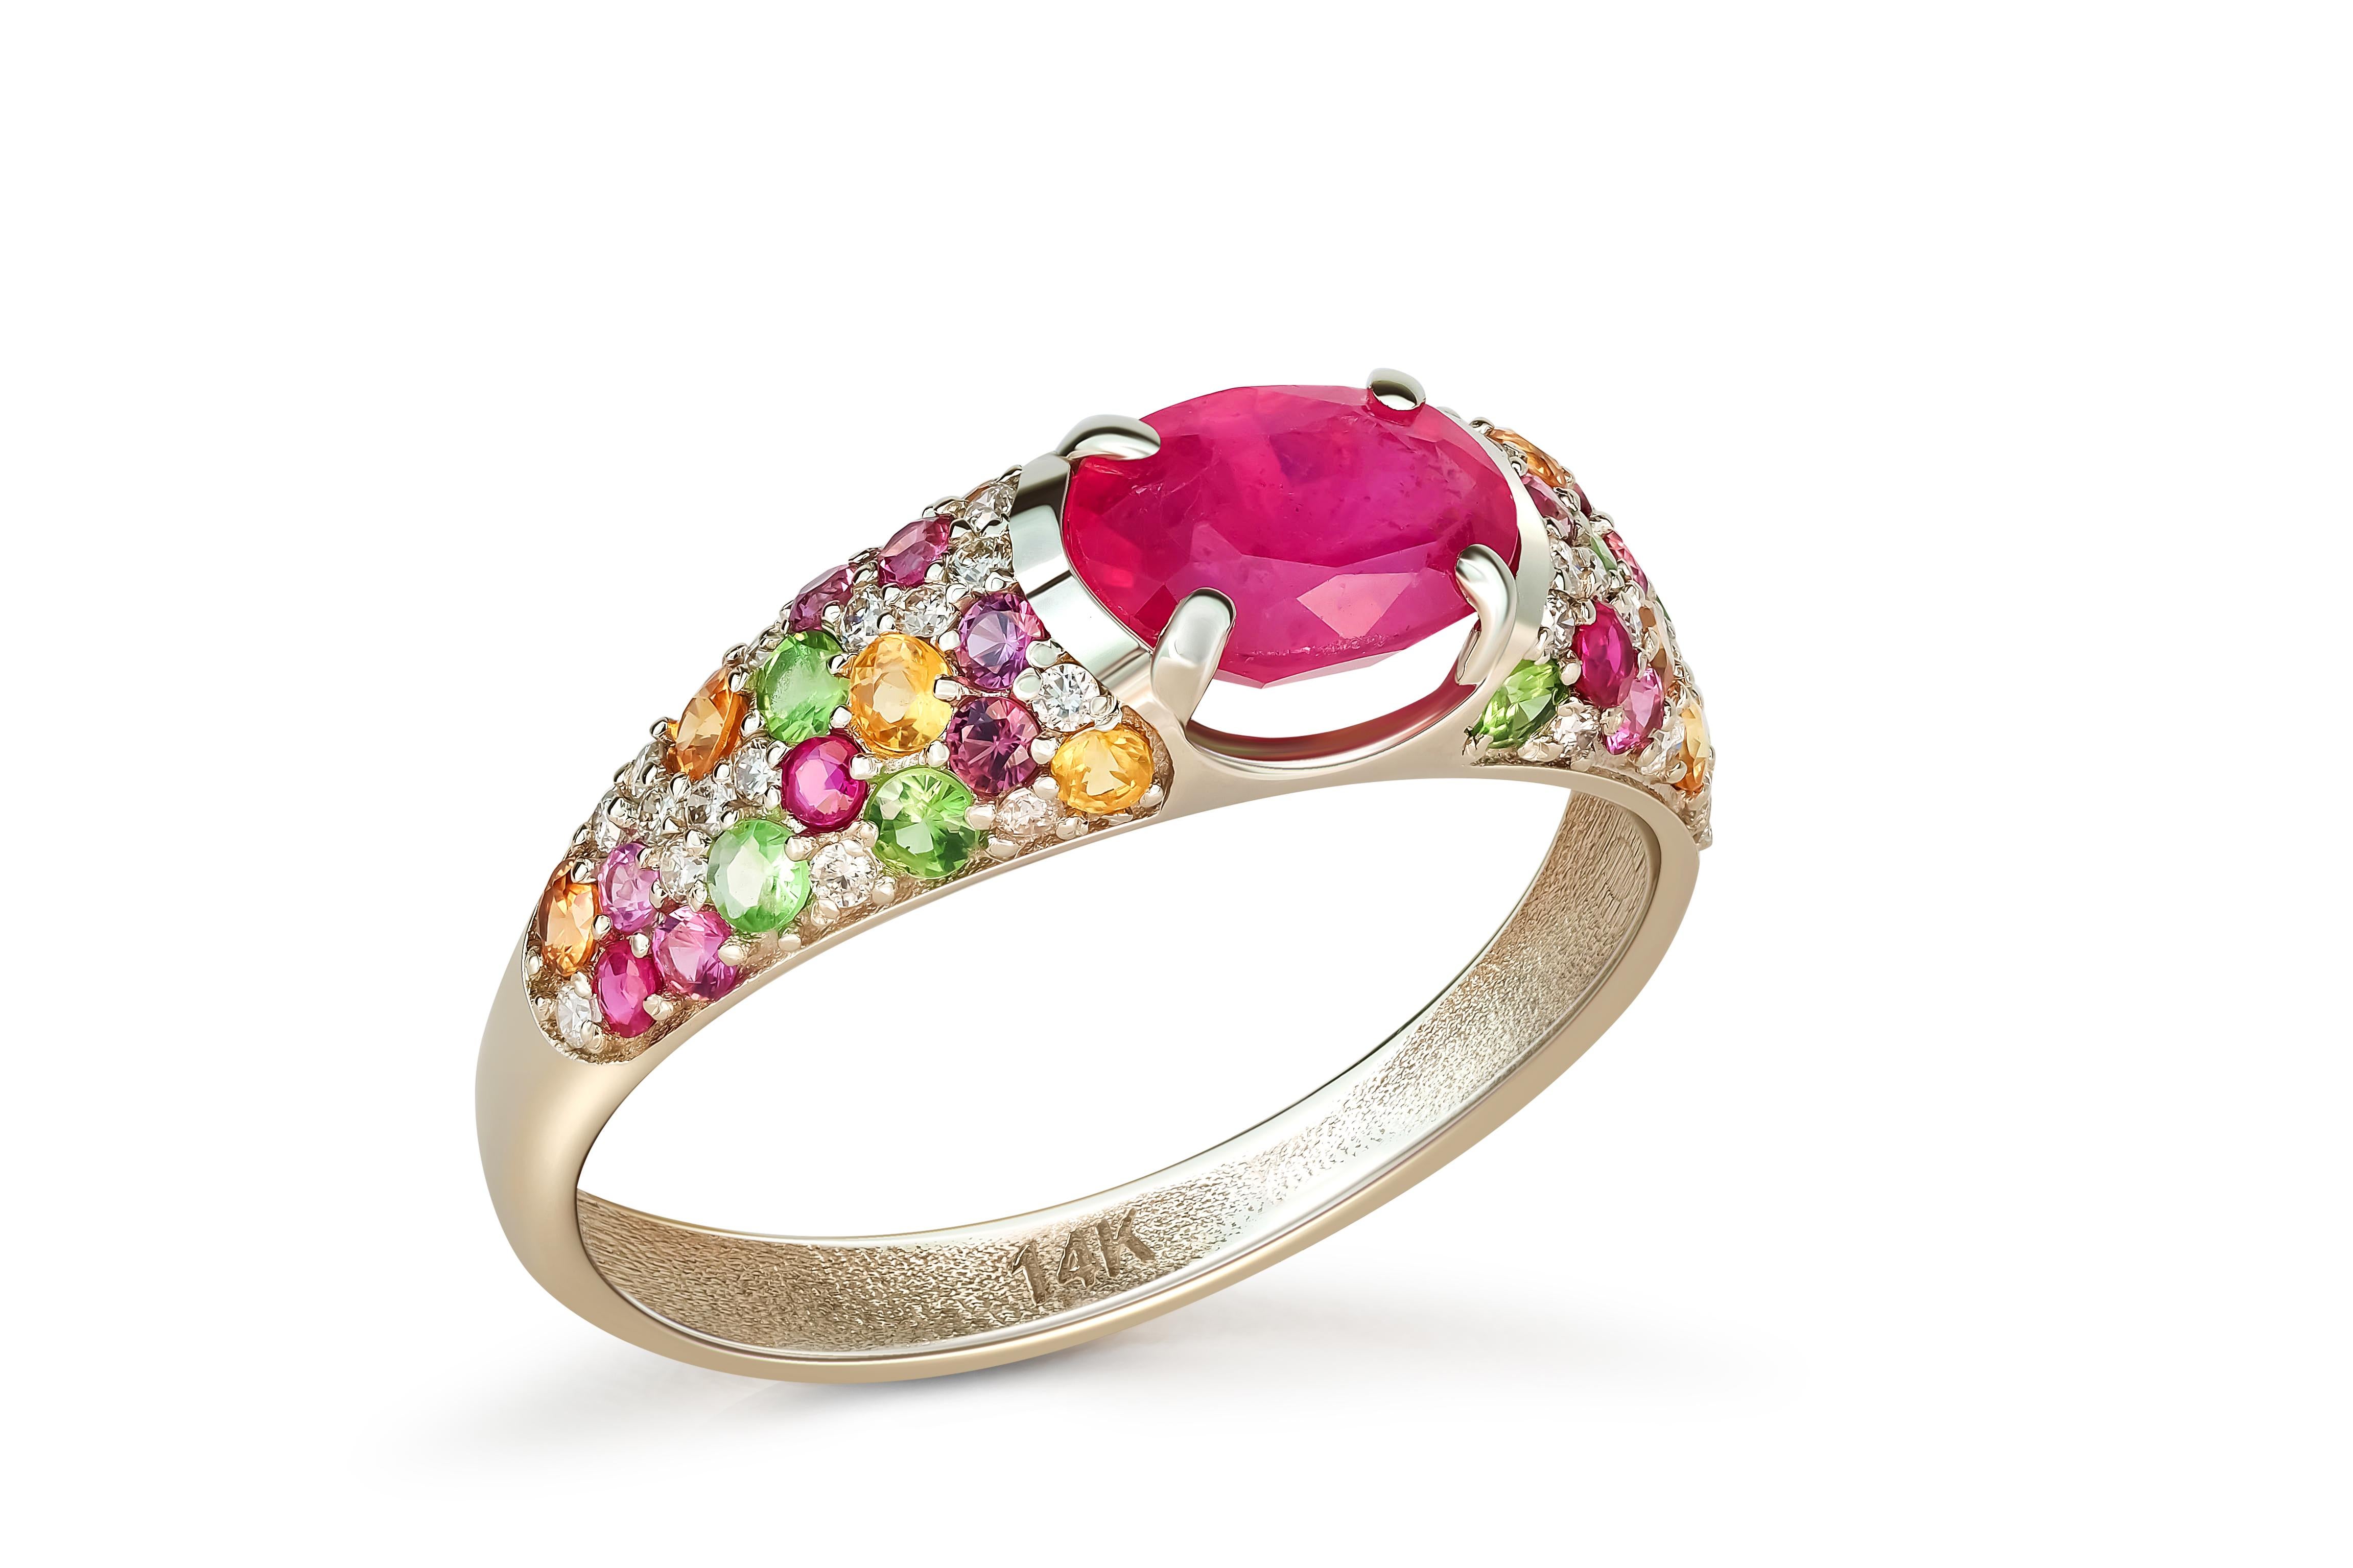 For Sale:  14k gold ruby and multicolored gemstones ring. 6